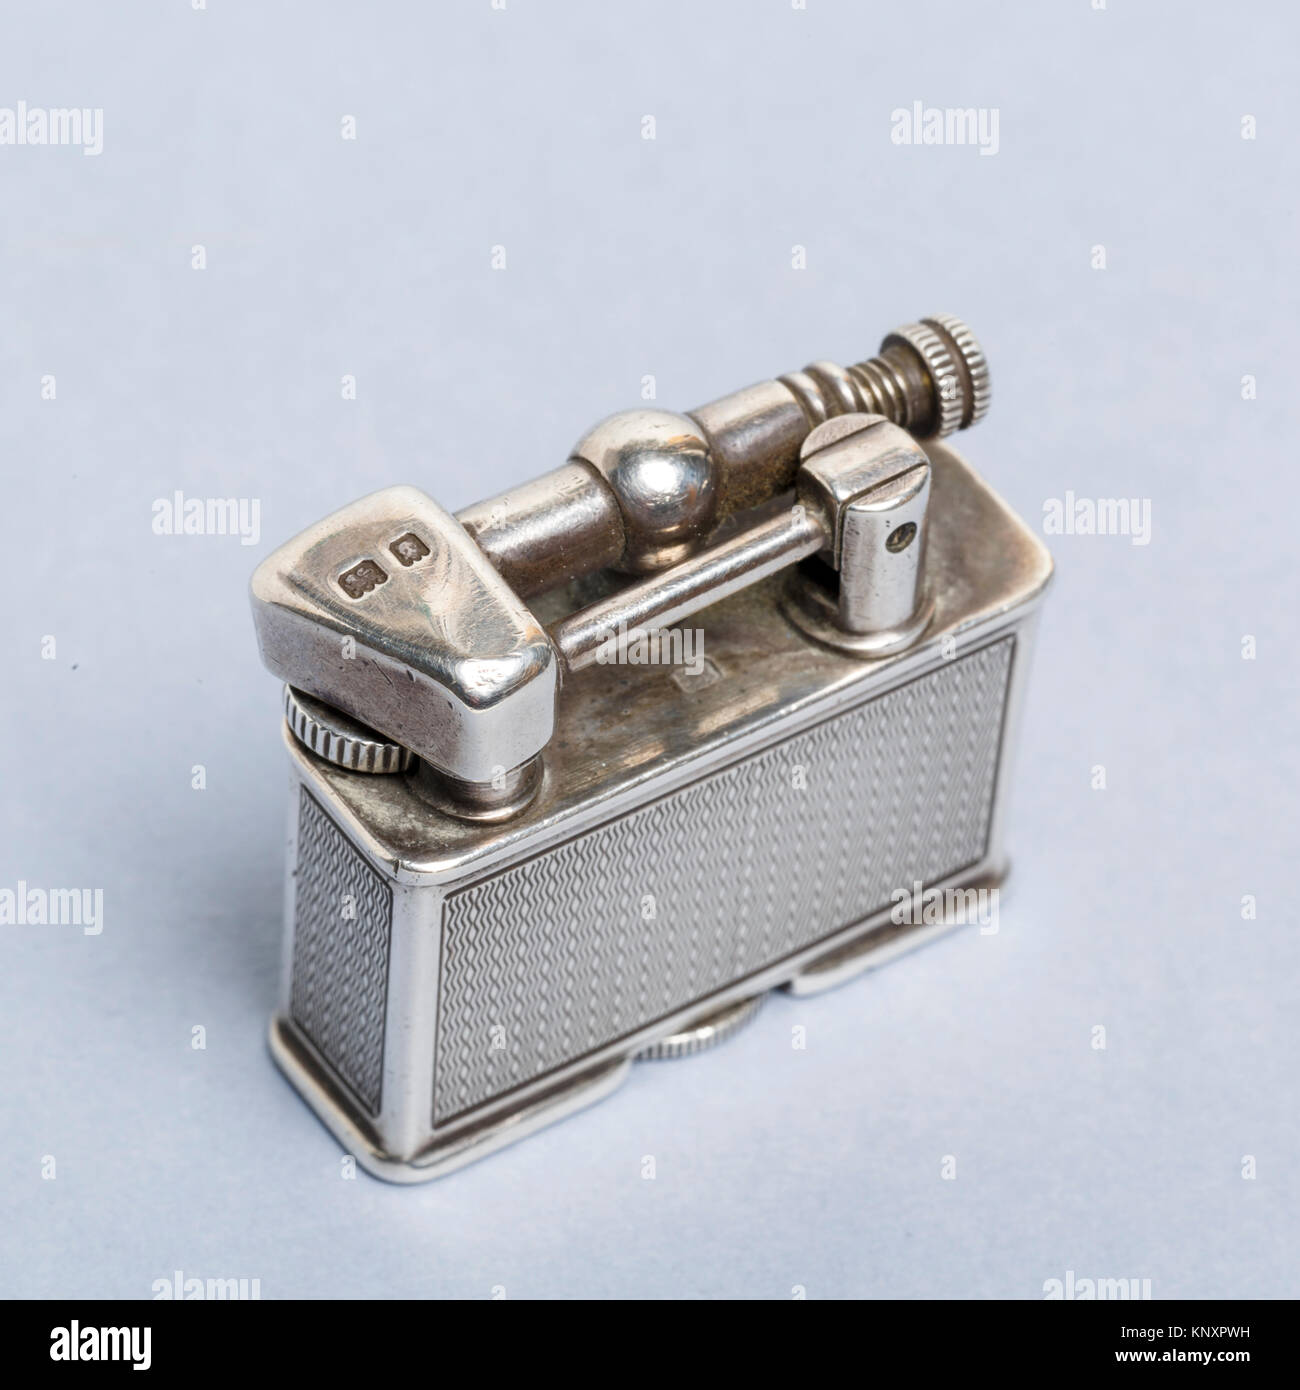 Small cigarette lighter in hallmarked silver made by Parker Beacon, a subsidiary of Dunhill.  Hallmarked P.P.Co. for Parker Pipe Company. Stock Photo